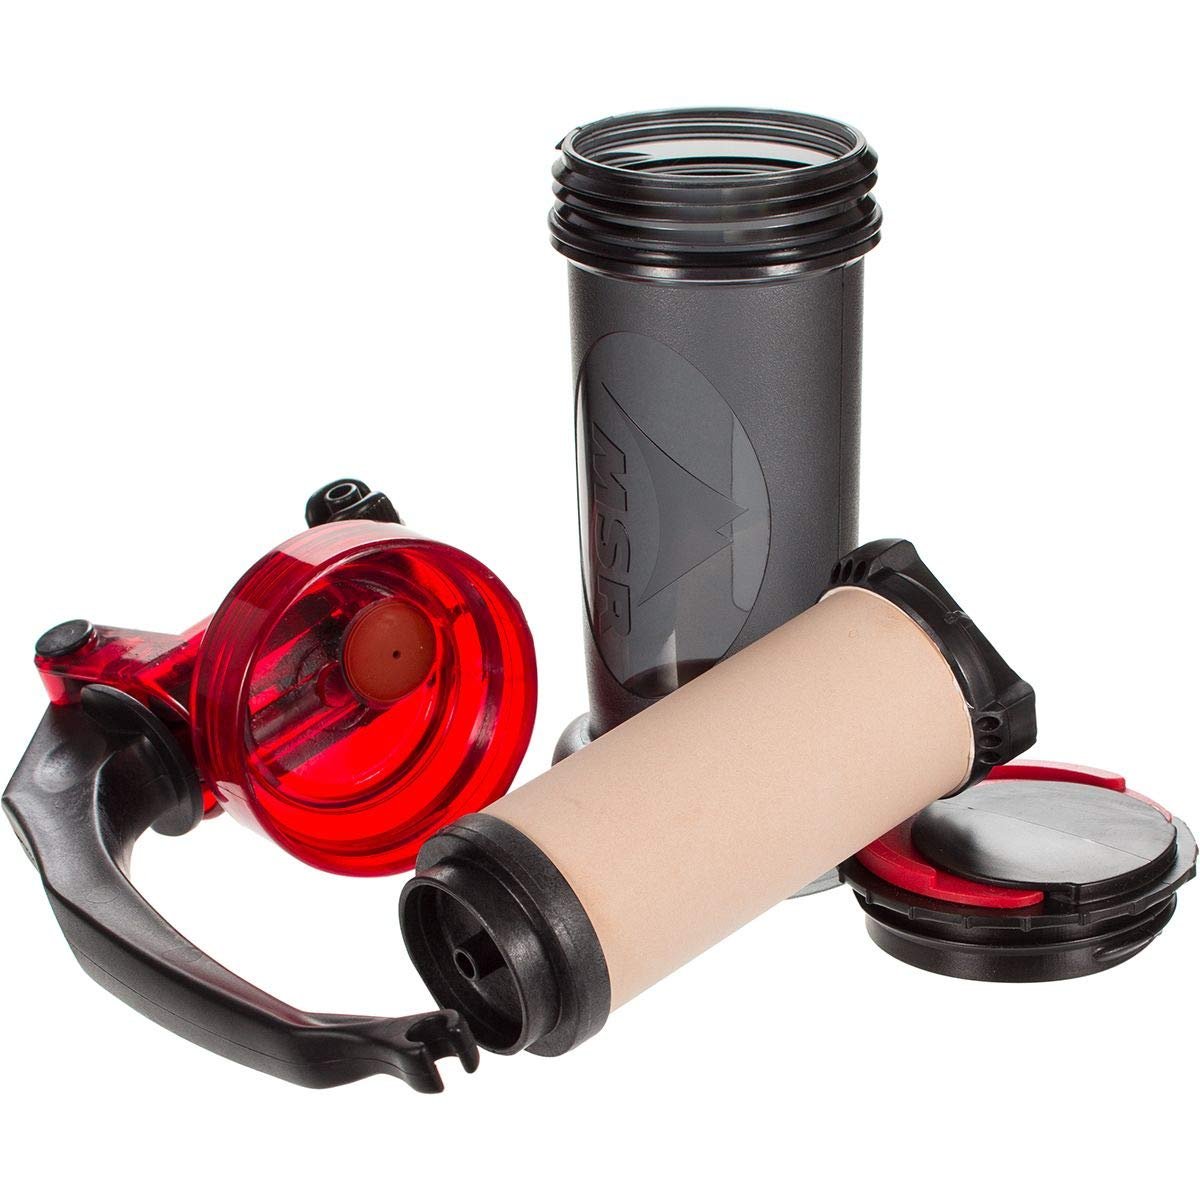 4 MiniWorks EX Backcountry Water Filter by MSR